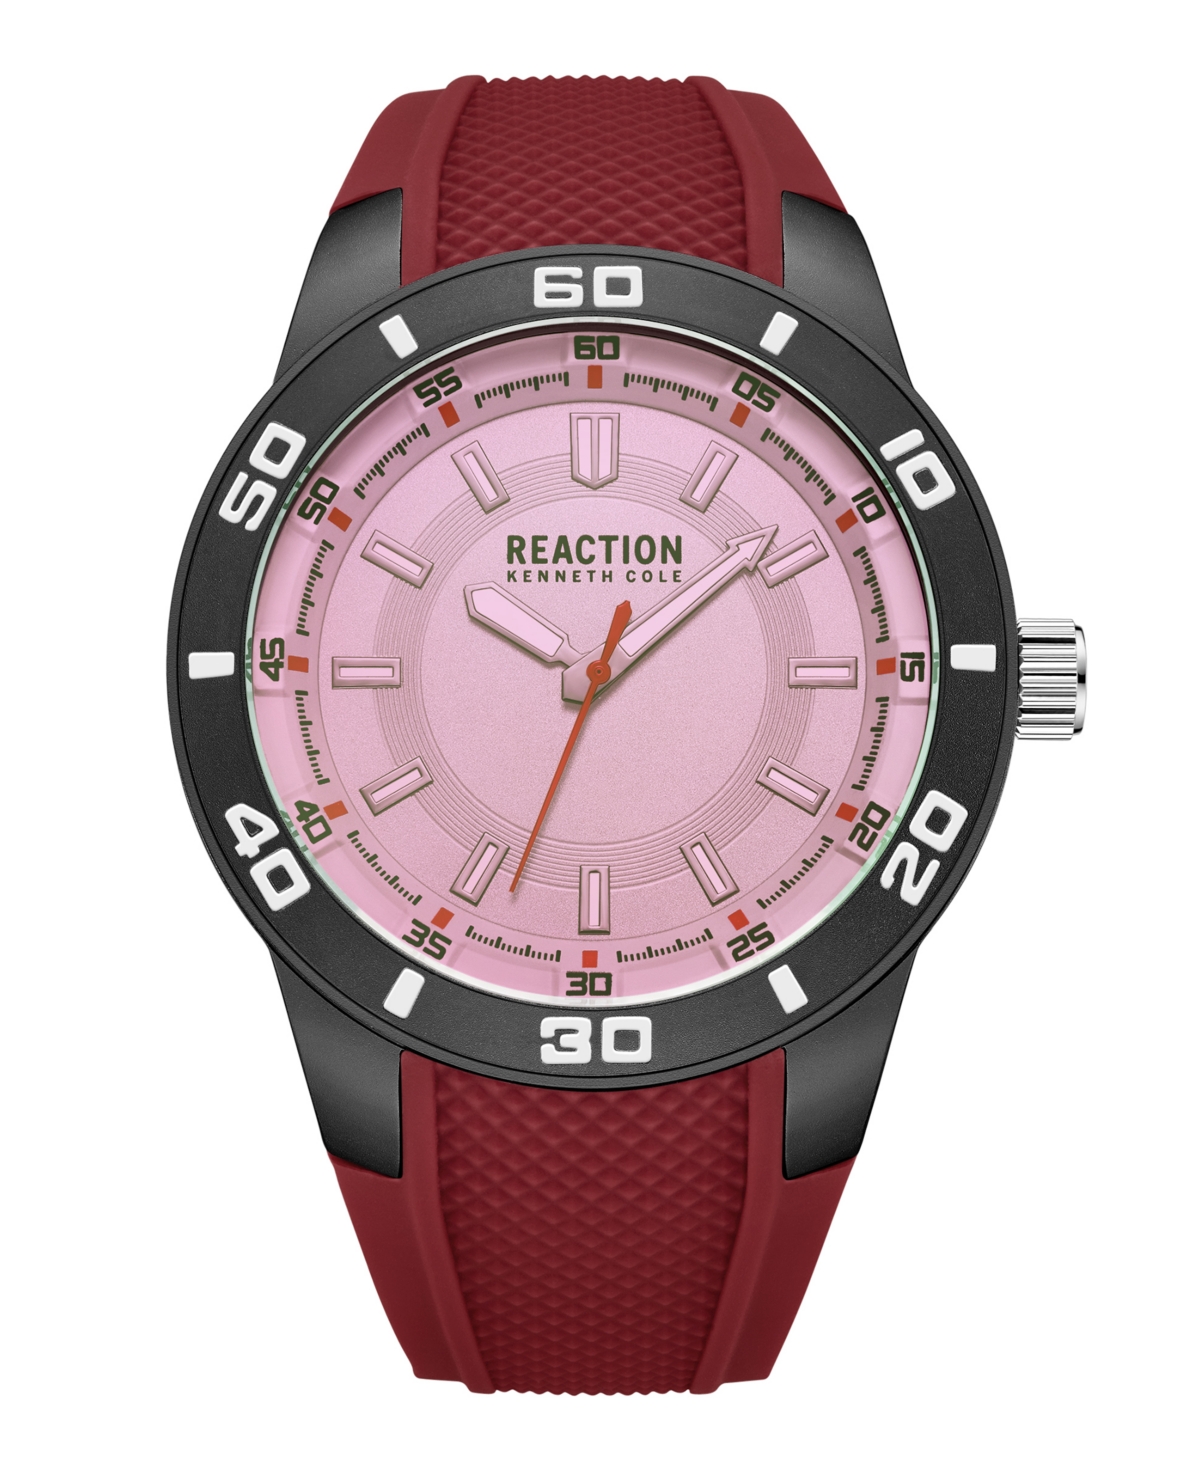 Men's Sporty Three Hand Red Silicon Strap Watch, 49mm - Red